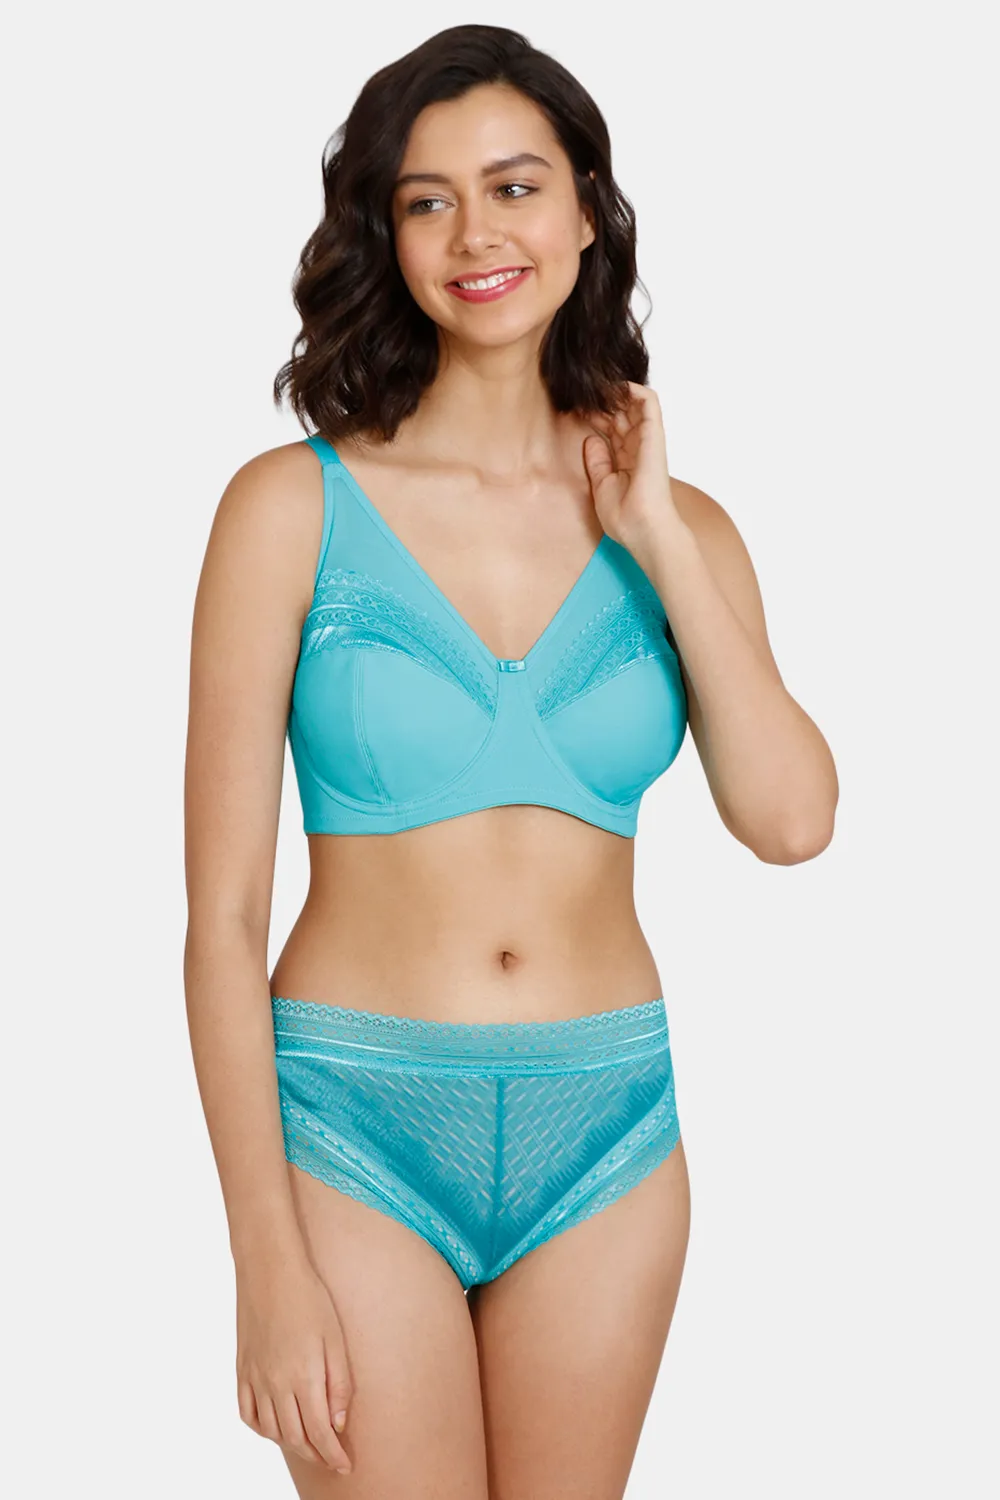 Buy 3 Pcs Set Of Sky Blue - Sea Green Color Bra, Panty And Night Slip  Online India, Best Prices, COD - Clovia